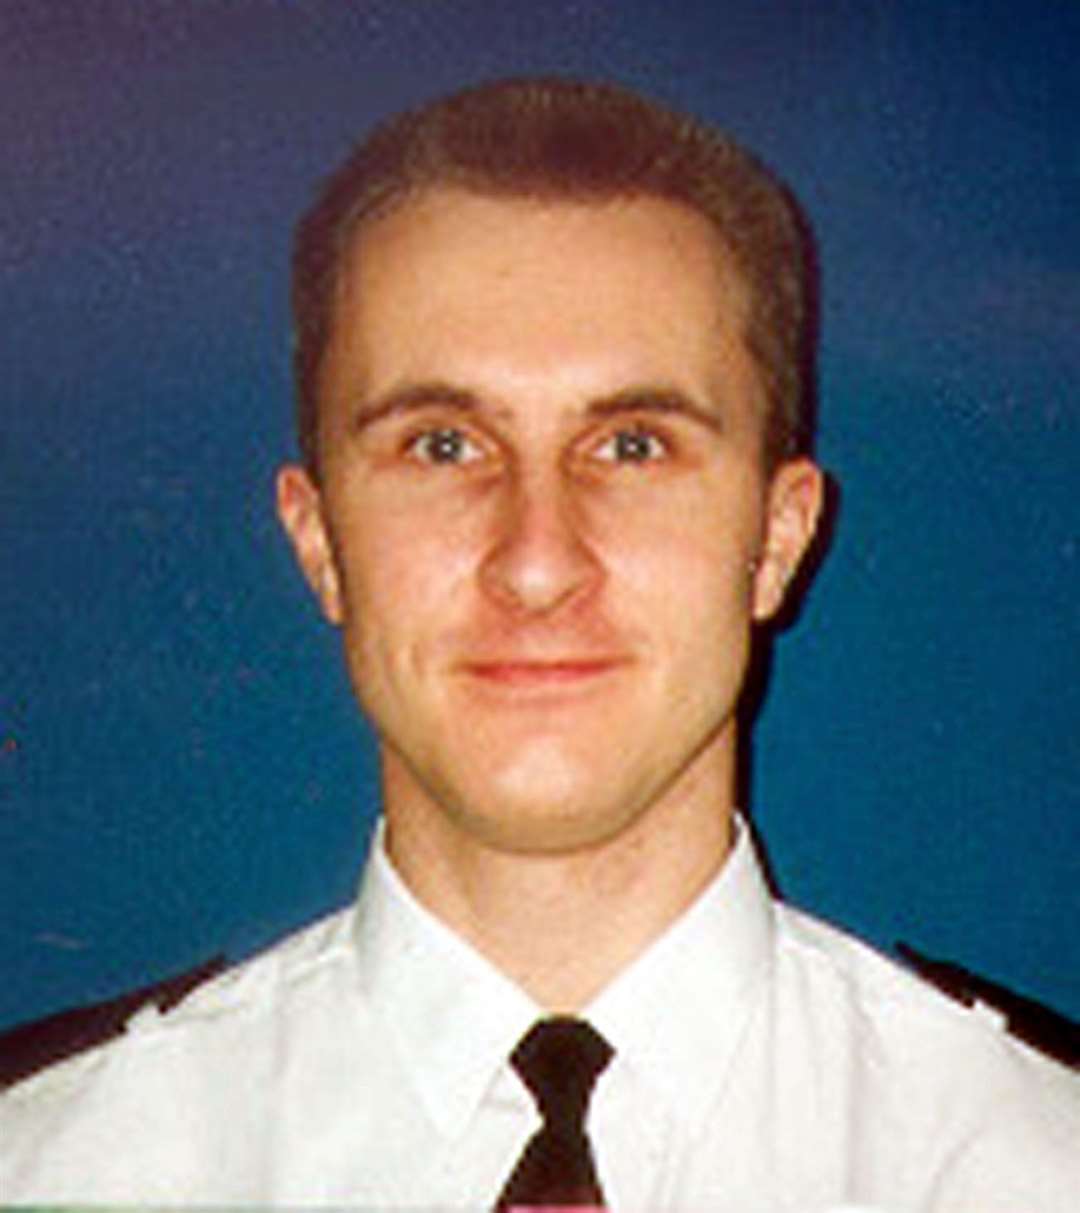 Pc Jon Odell was dragged 50 yards along the road after being hit by Rule in December 2000 (Kent Police/PA)